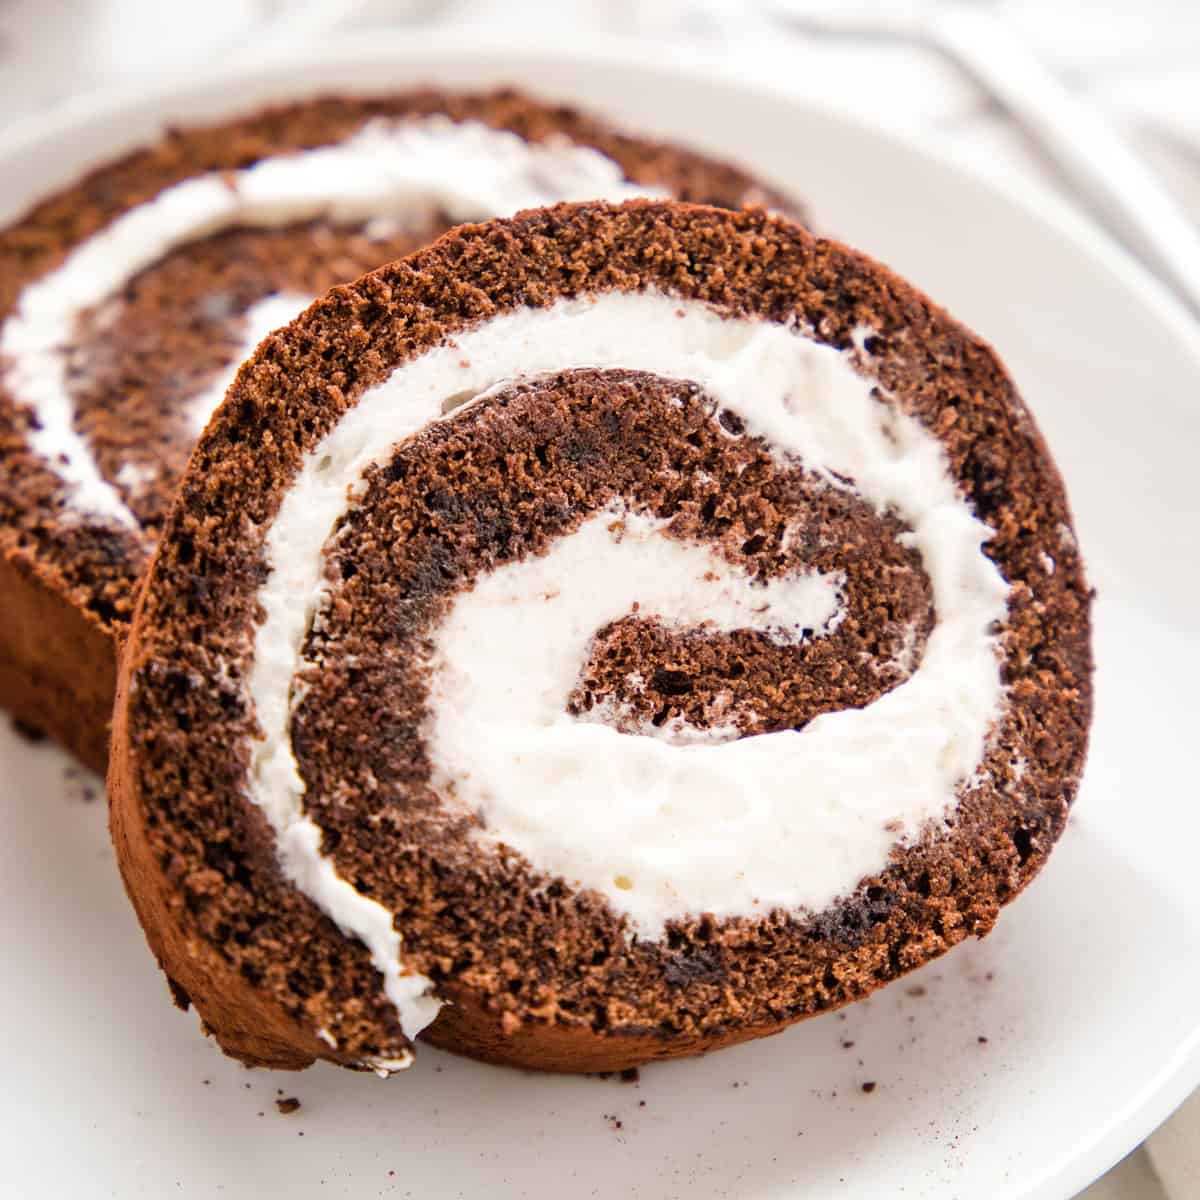 Chocolate Swiss Roll - The Busy Baker